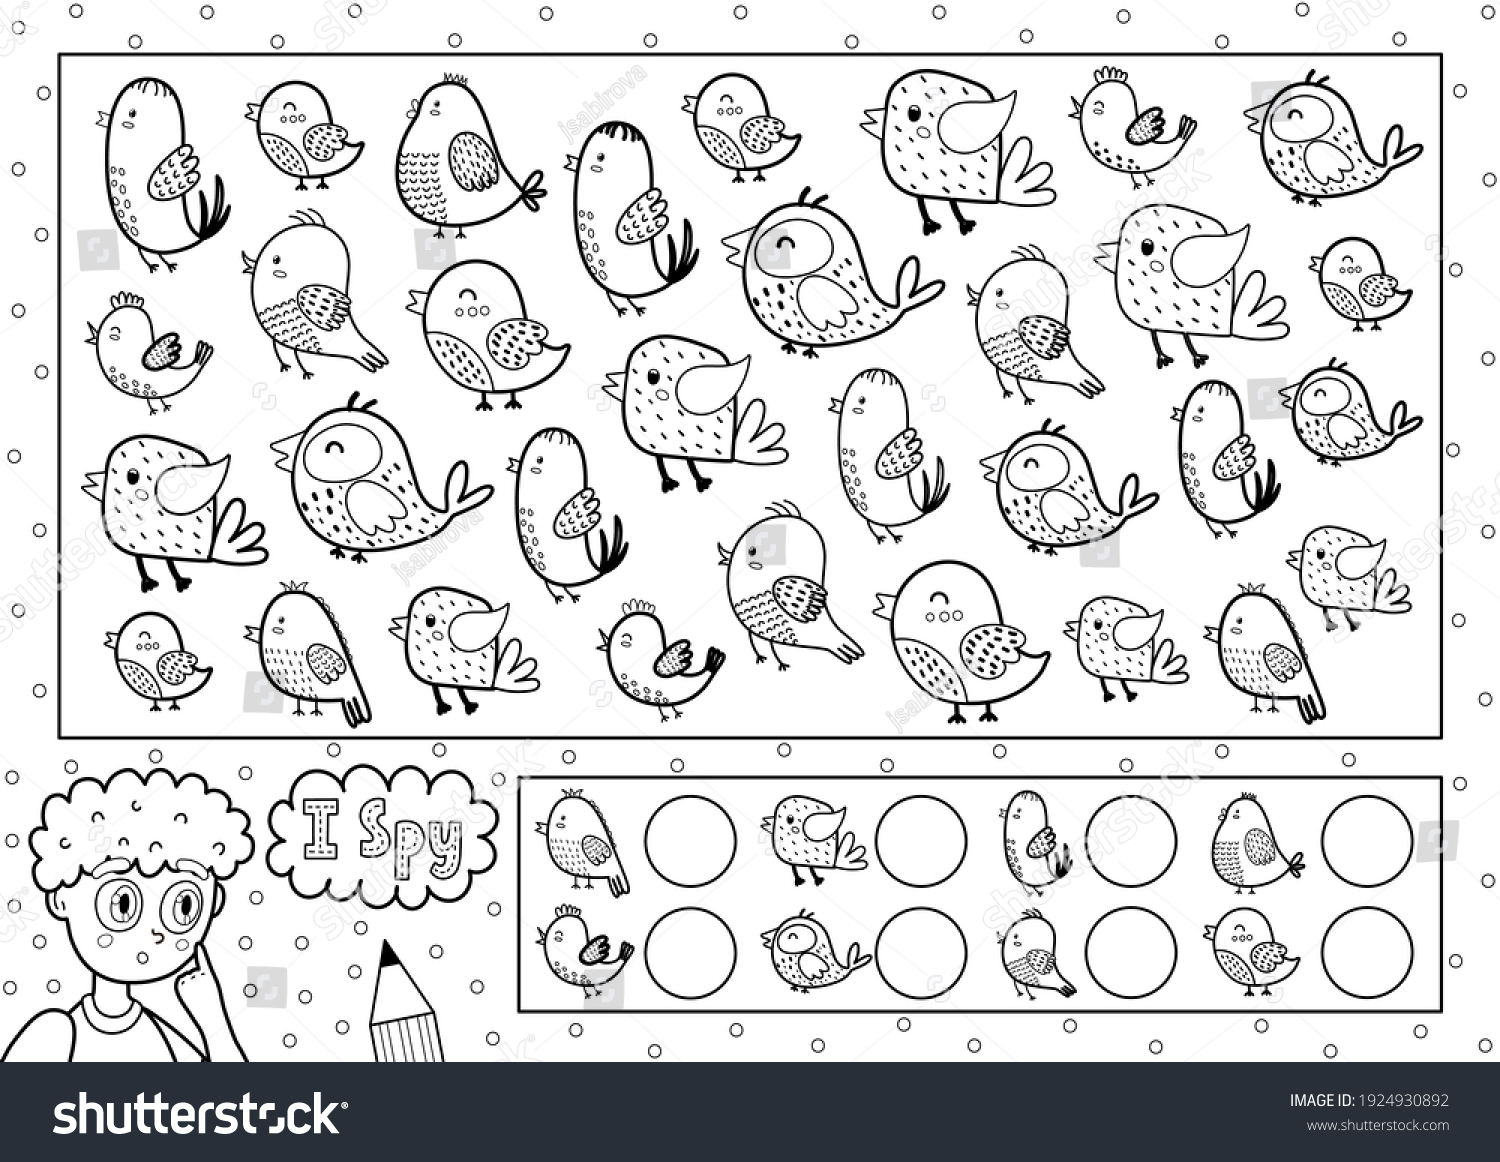 20,20,5720 Coloring page Images, Stock Photos & Vectors   Shutterstock